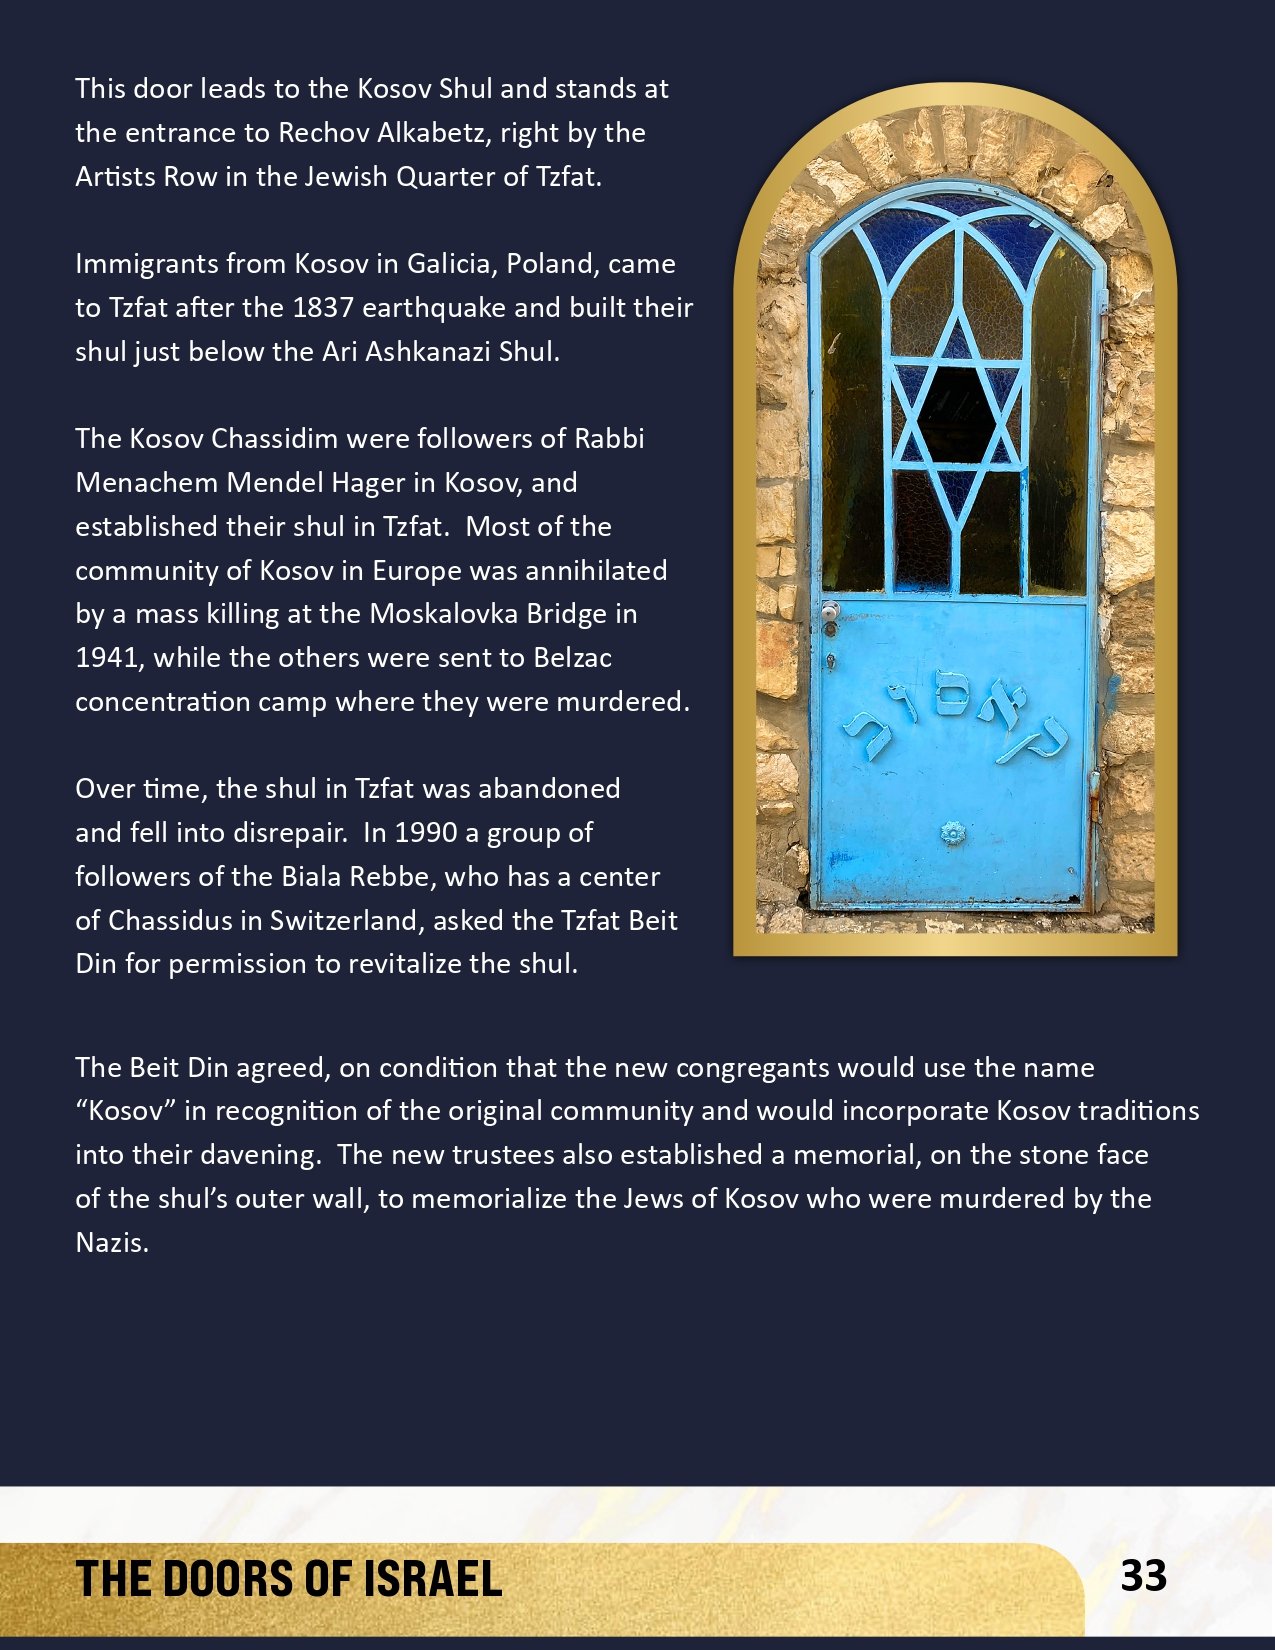 THE DOORS OF ISRAEL-6 INSIDE TEXT-33_page-0001.jpg